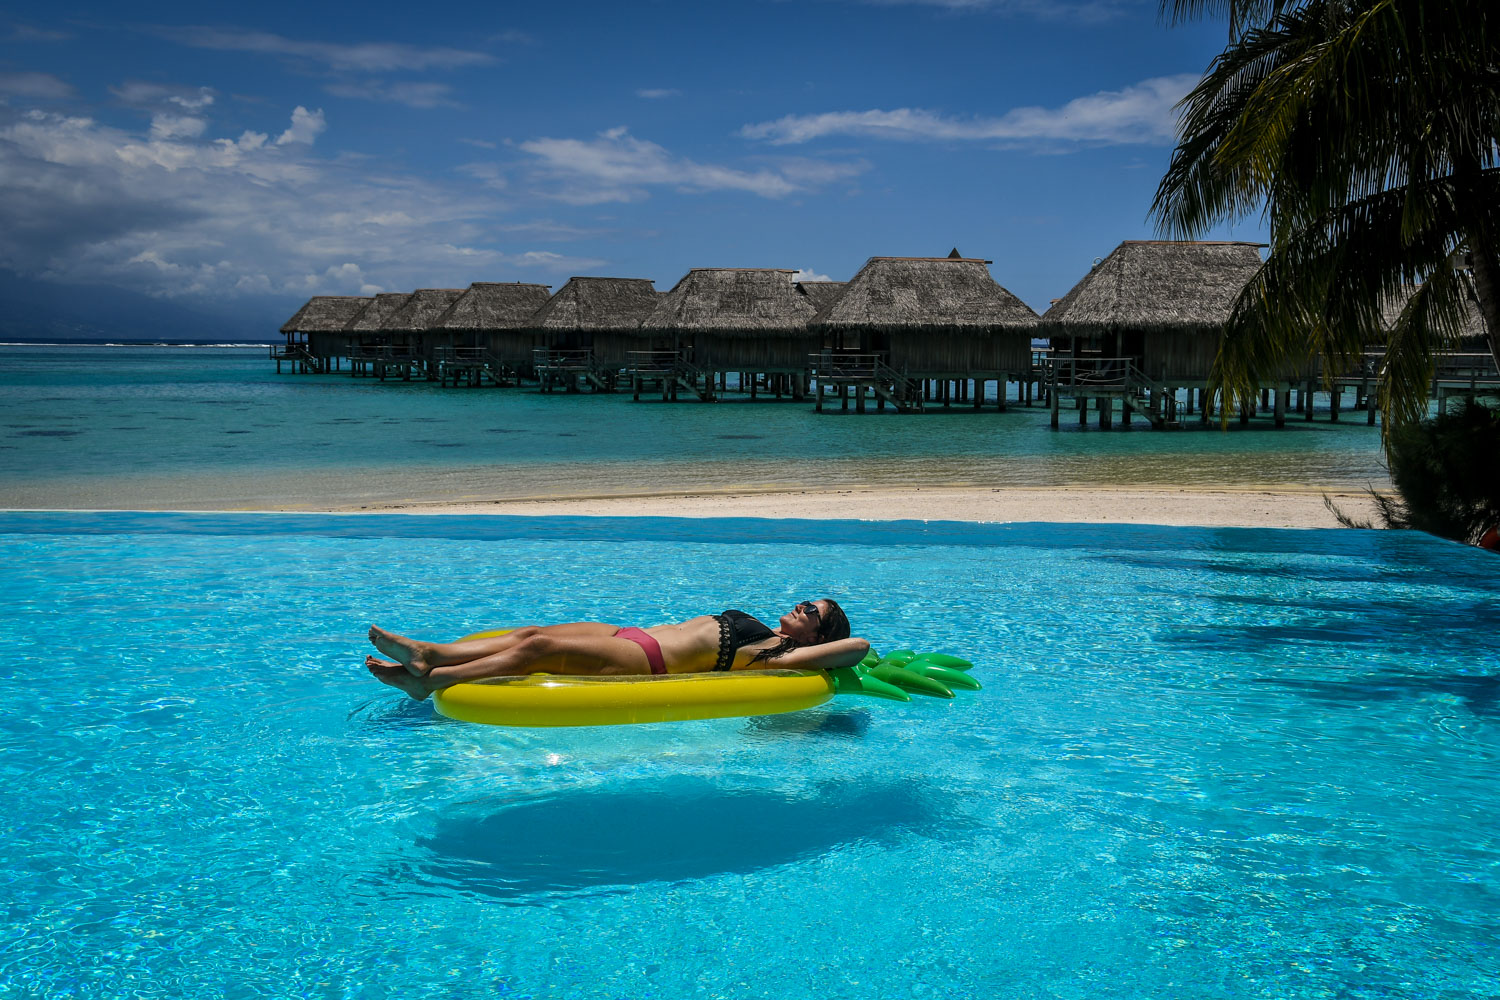 As a Digital Nomad, you can even bring your work with you to Tahiti…